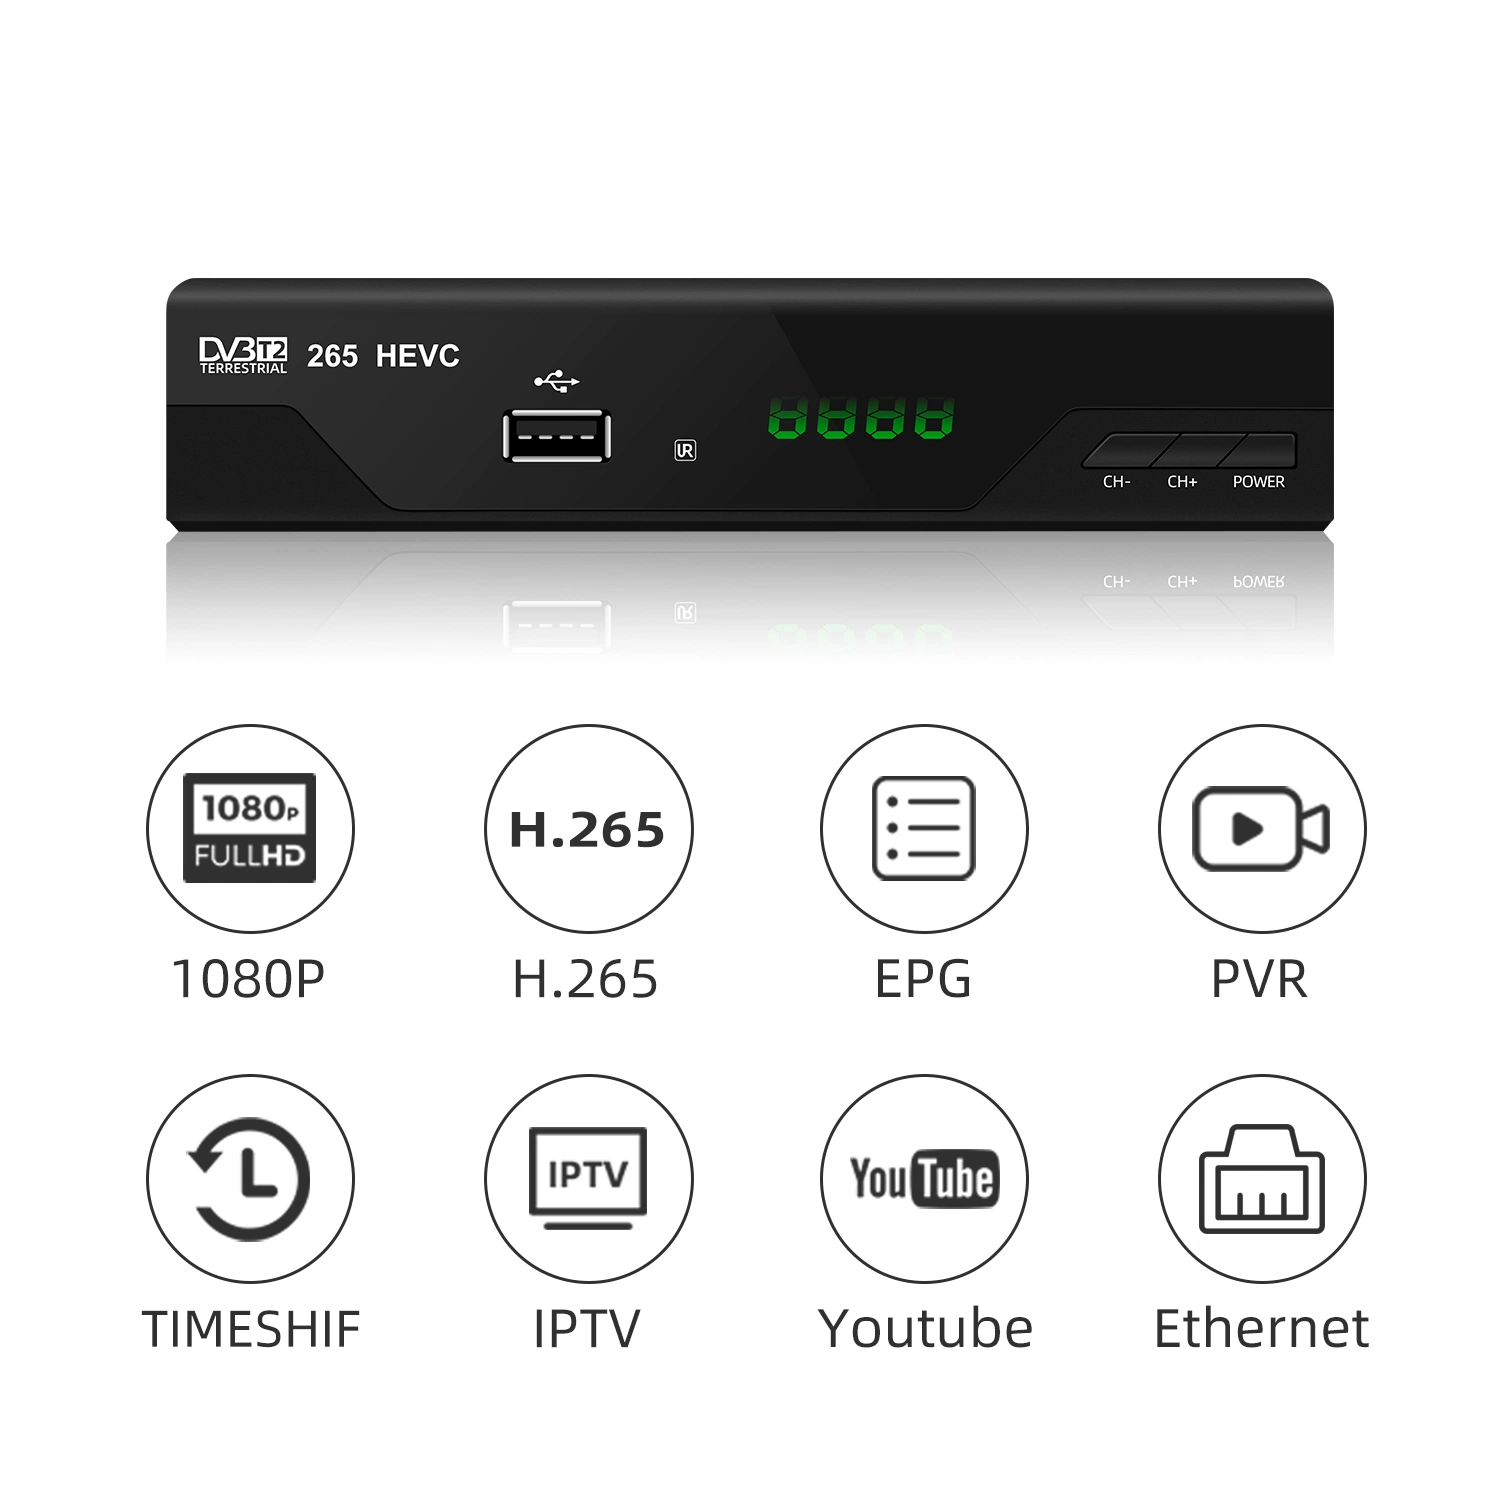 DVB-T2 Hevc Digital Set Top Box with Ethernet Output for Italy